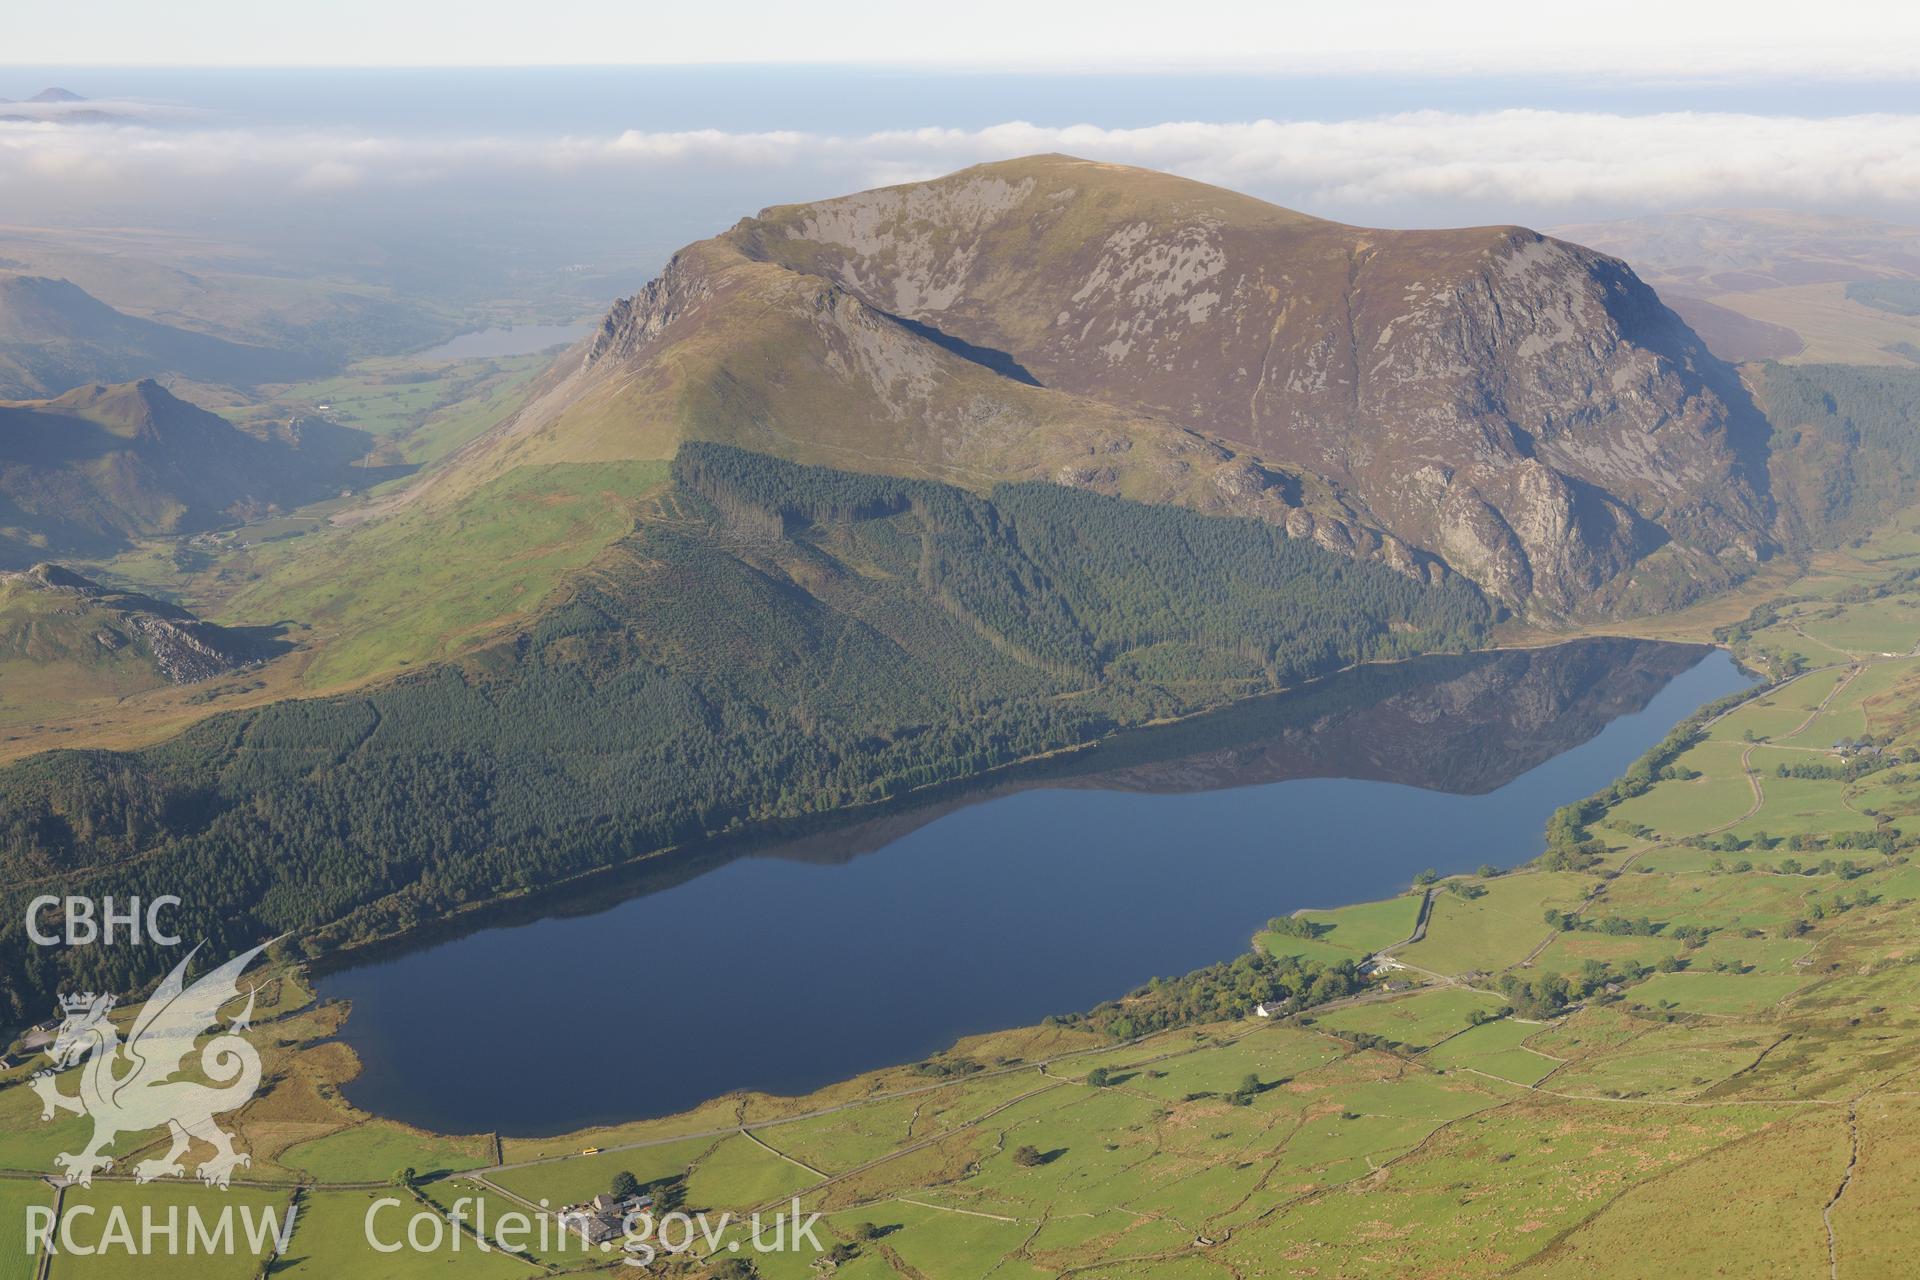 Llyn Cwellyn on the north western side of Snowdon. Oblique aerial photograph taken during the Royal Commission's programme of archaeological aerial reconnaissance by Toby Driver on 2nd October 2015.